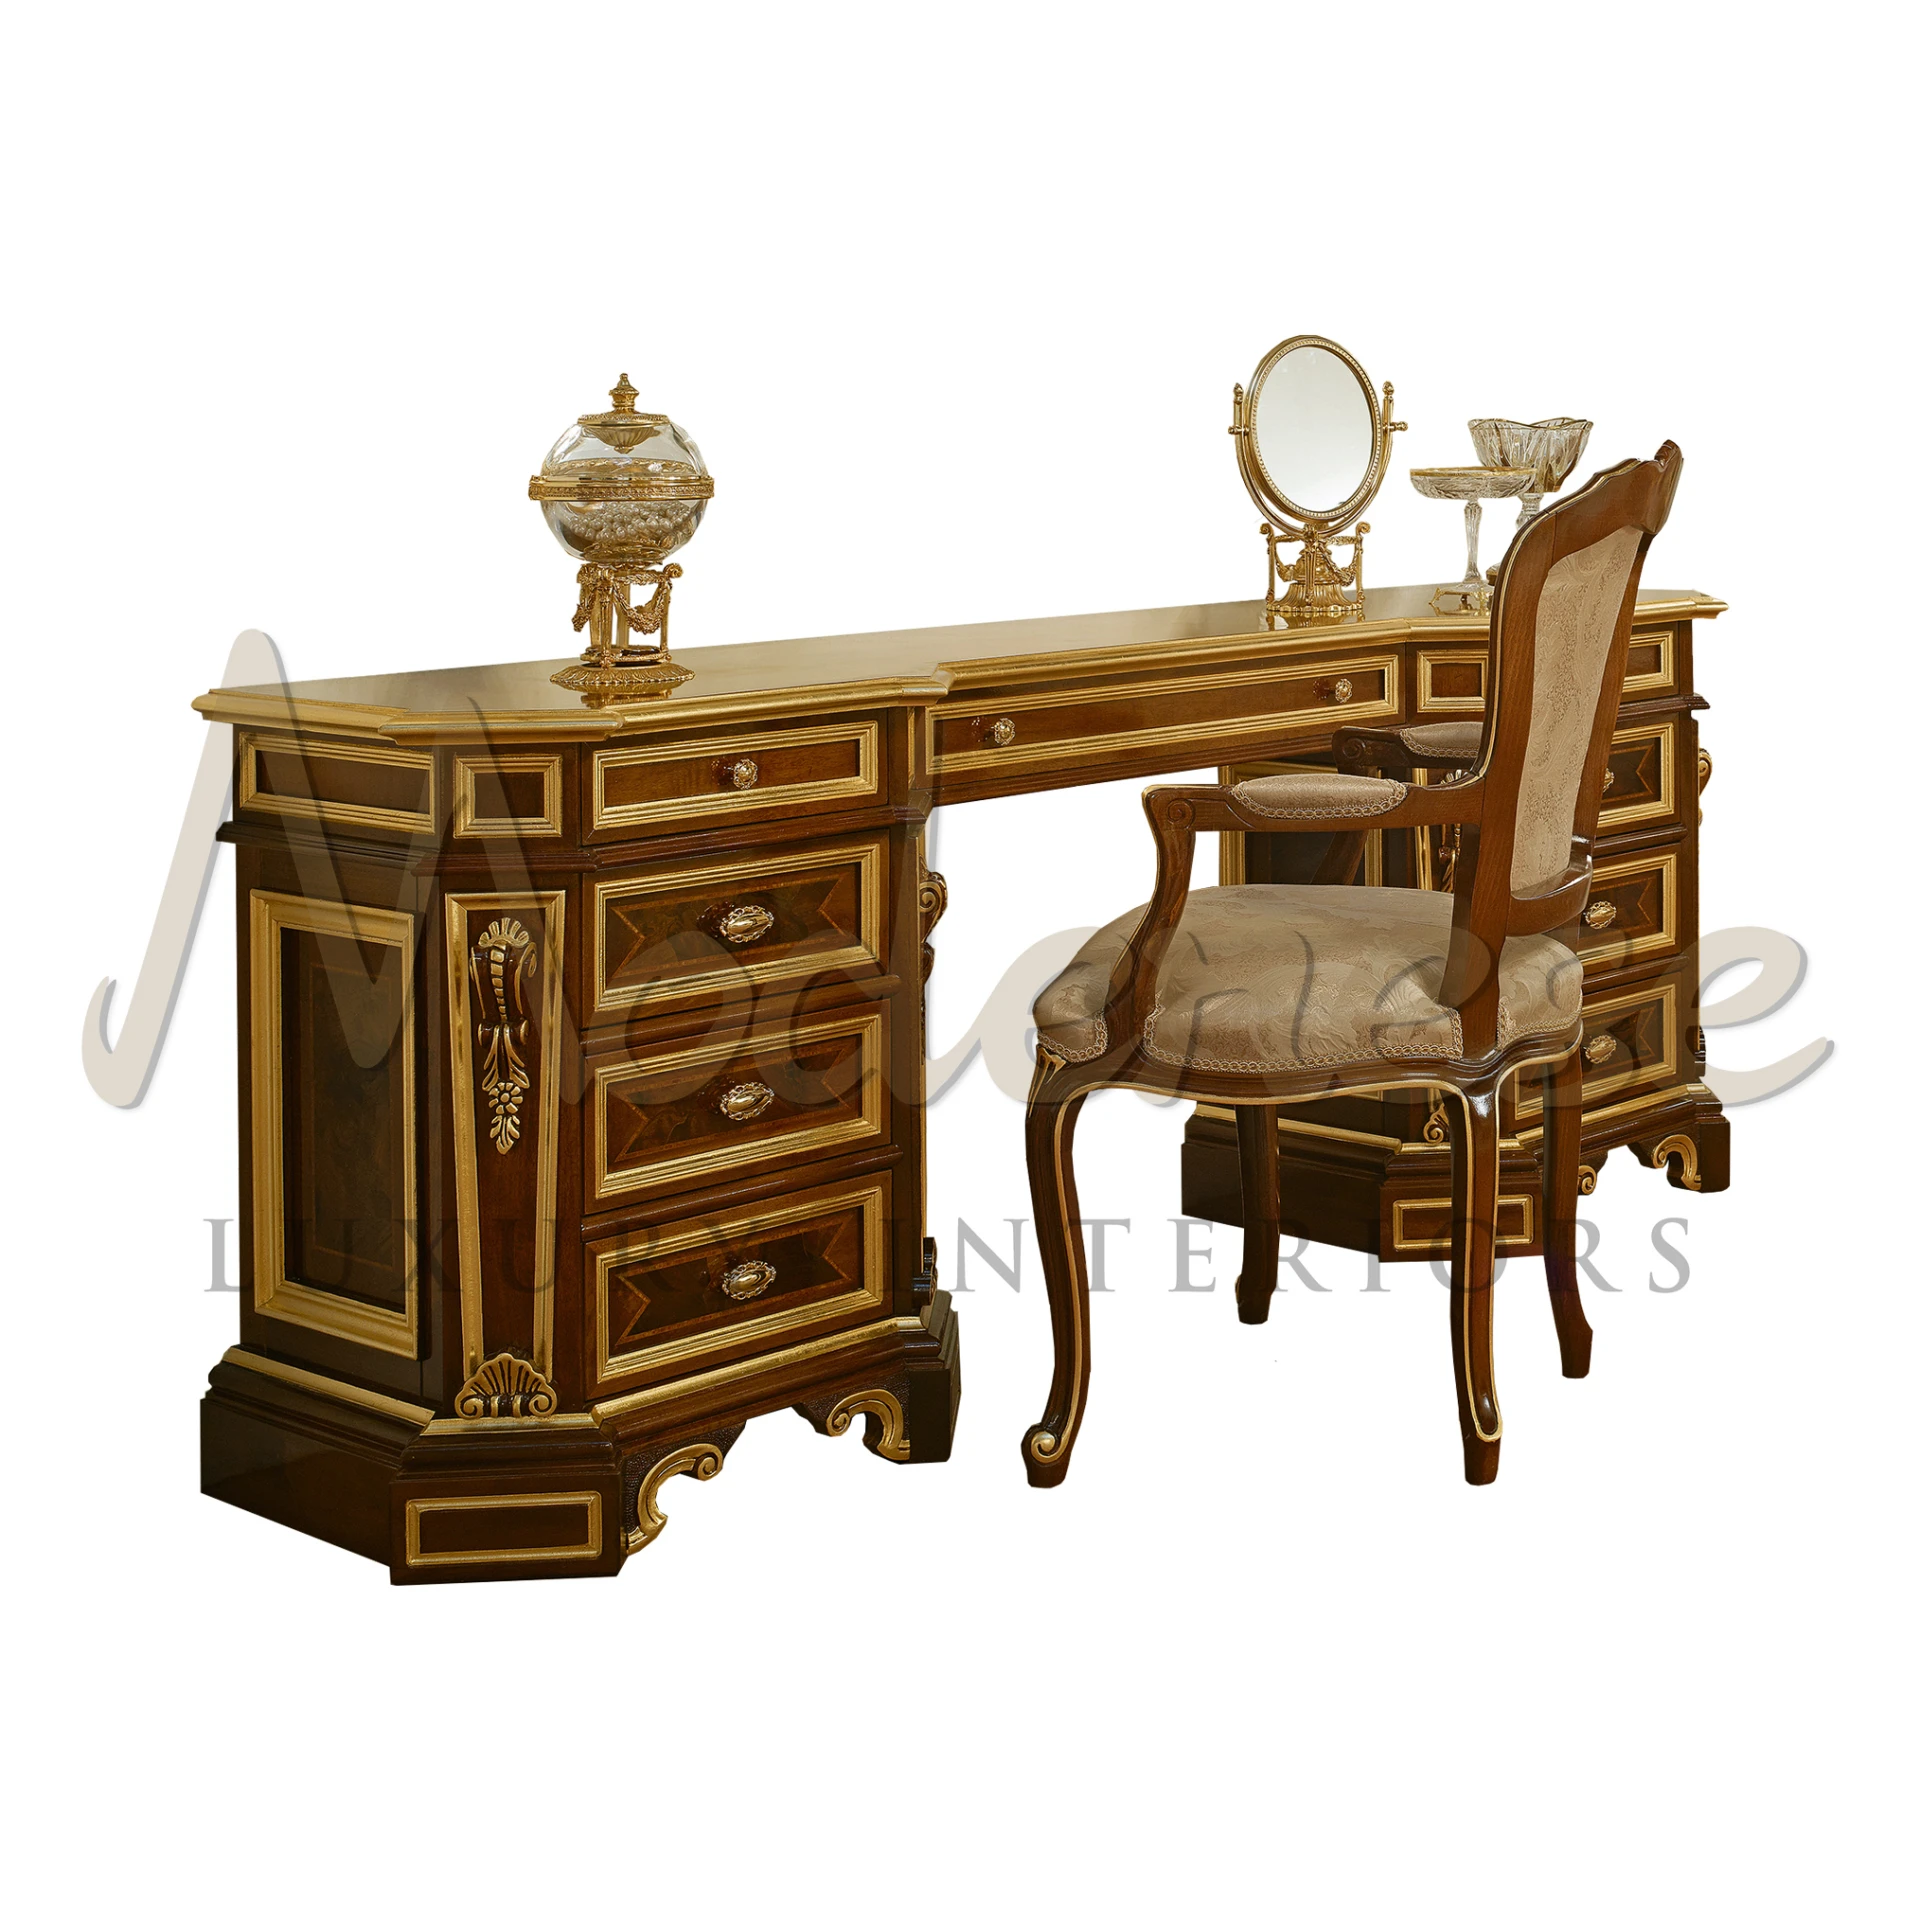 Elegant dressing table with a golden hue, detailed carvings, an opulent framed mirror, and a matching chair, embodying a classic, luxurious style.